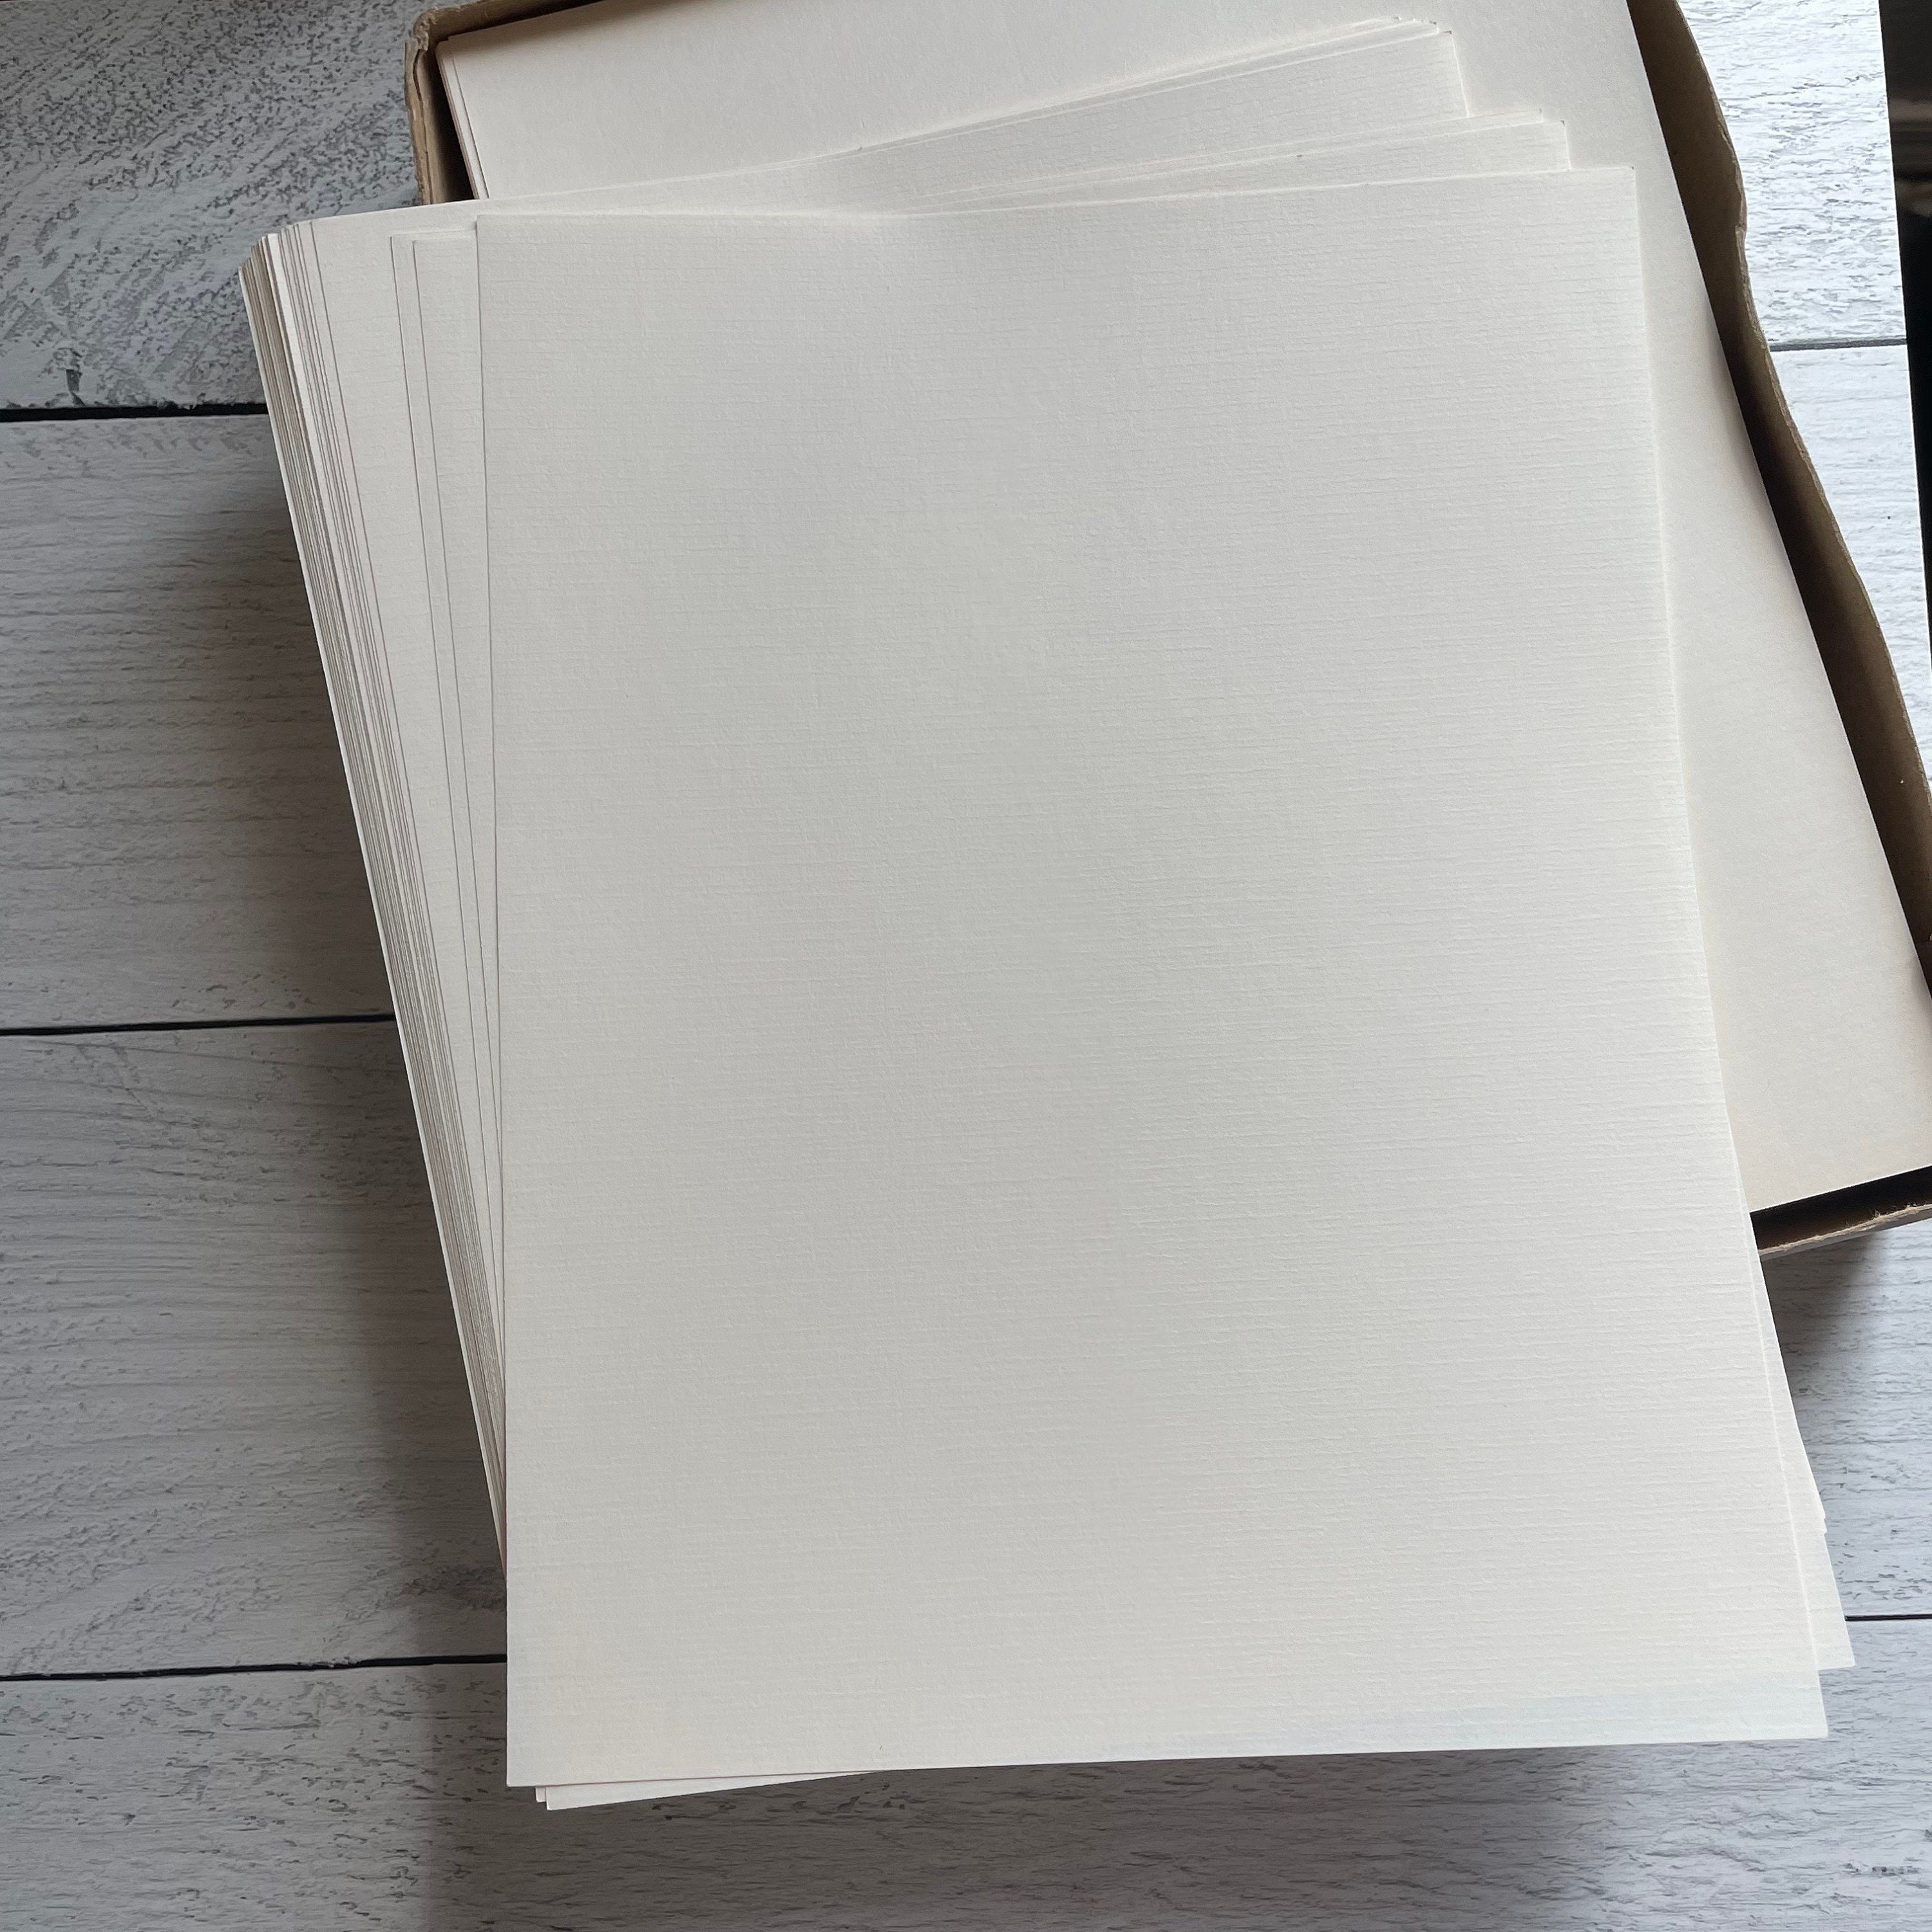 Southworth Fine Linen Paper 25 Piece 8-1/2 X 11 24lb Weight Watermarked  Choose White -  Israel